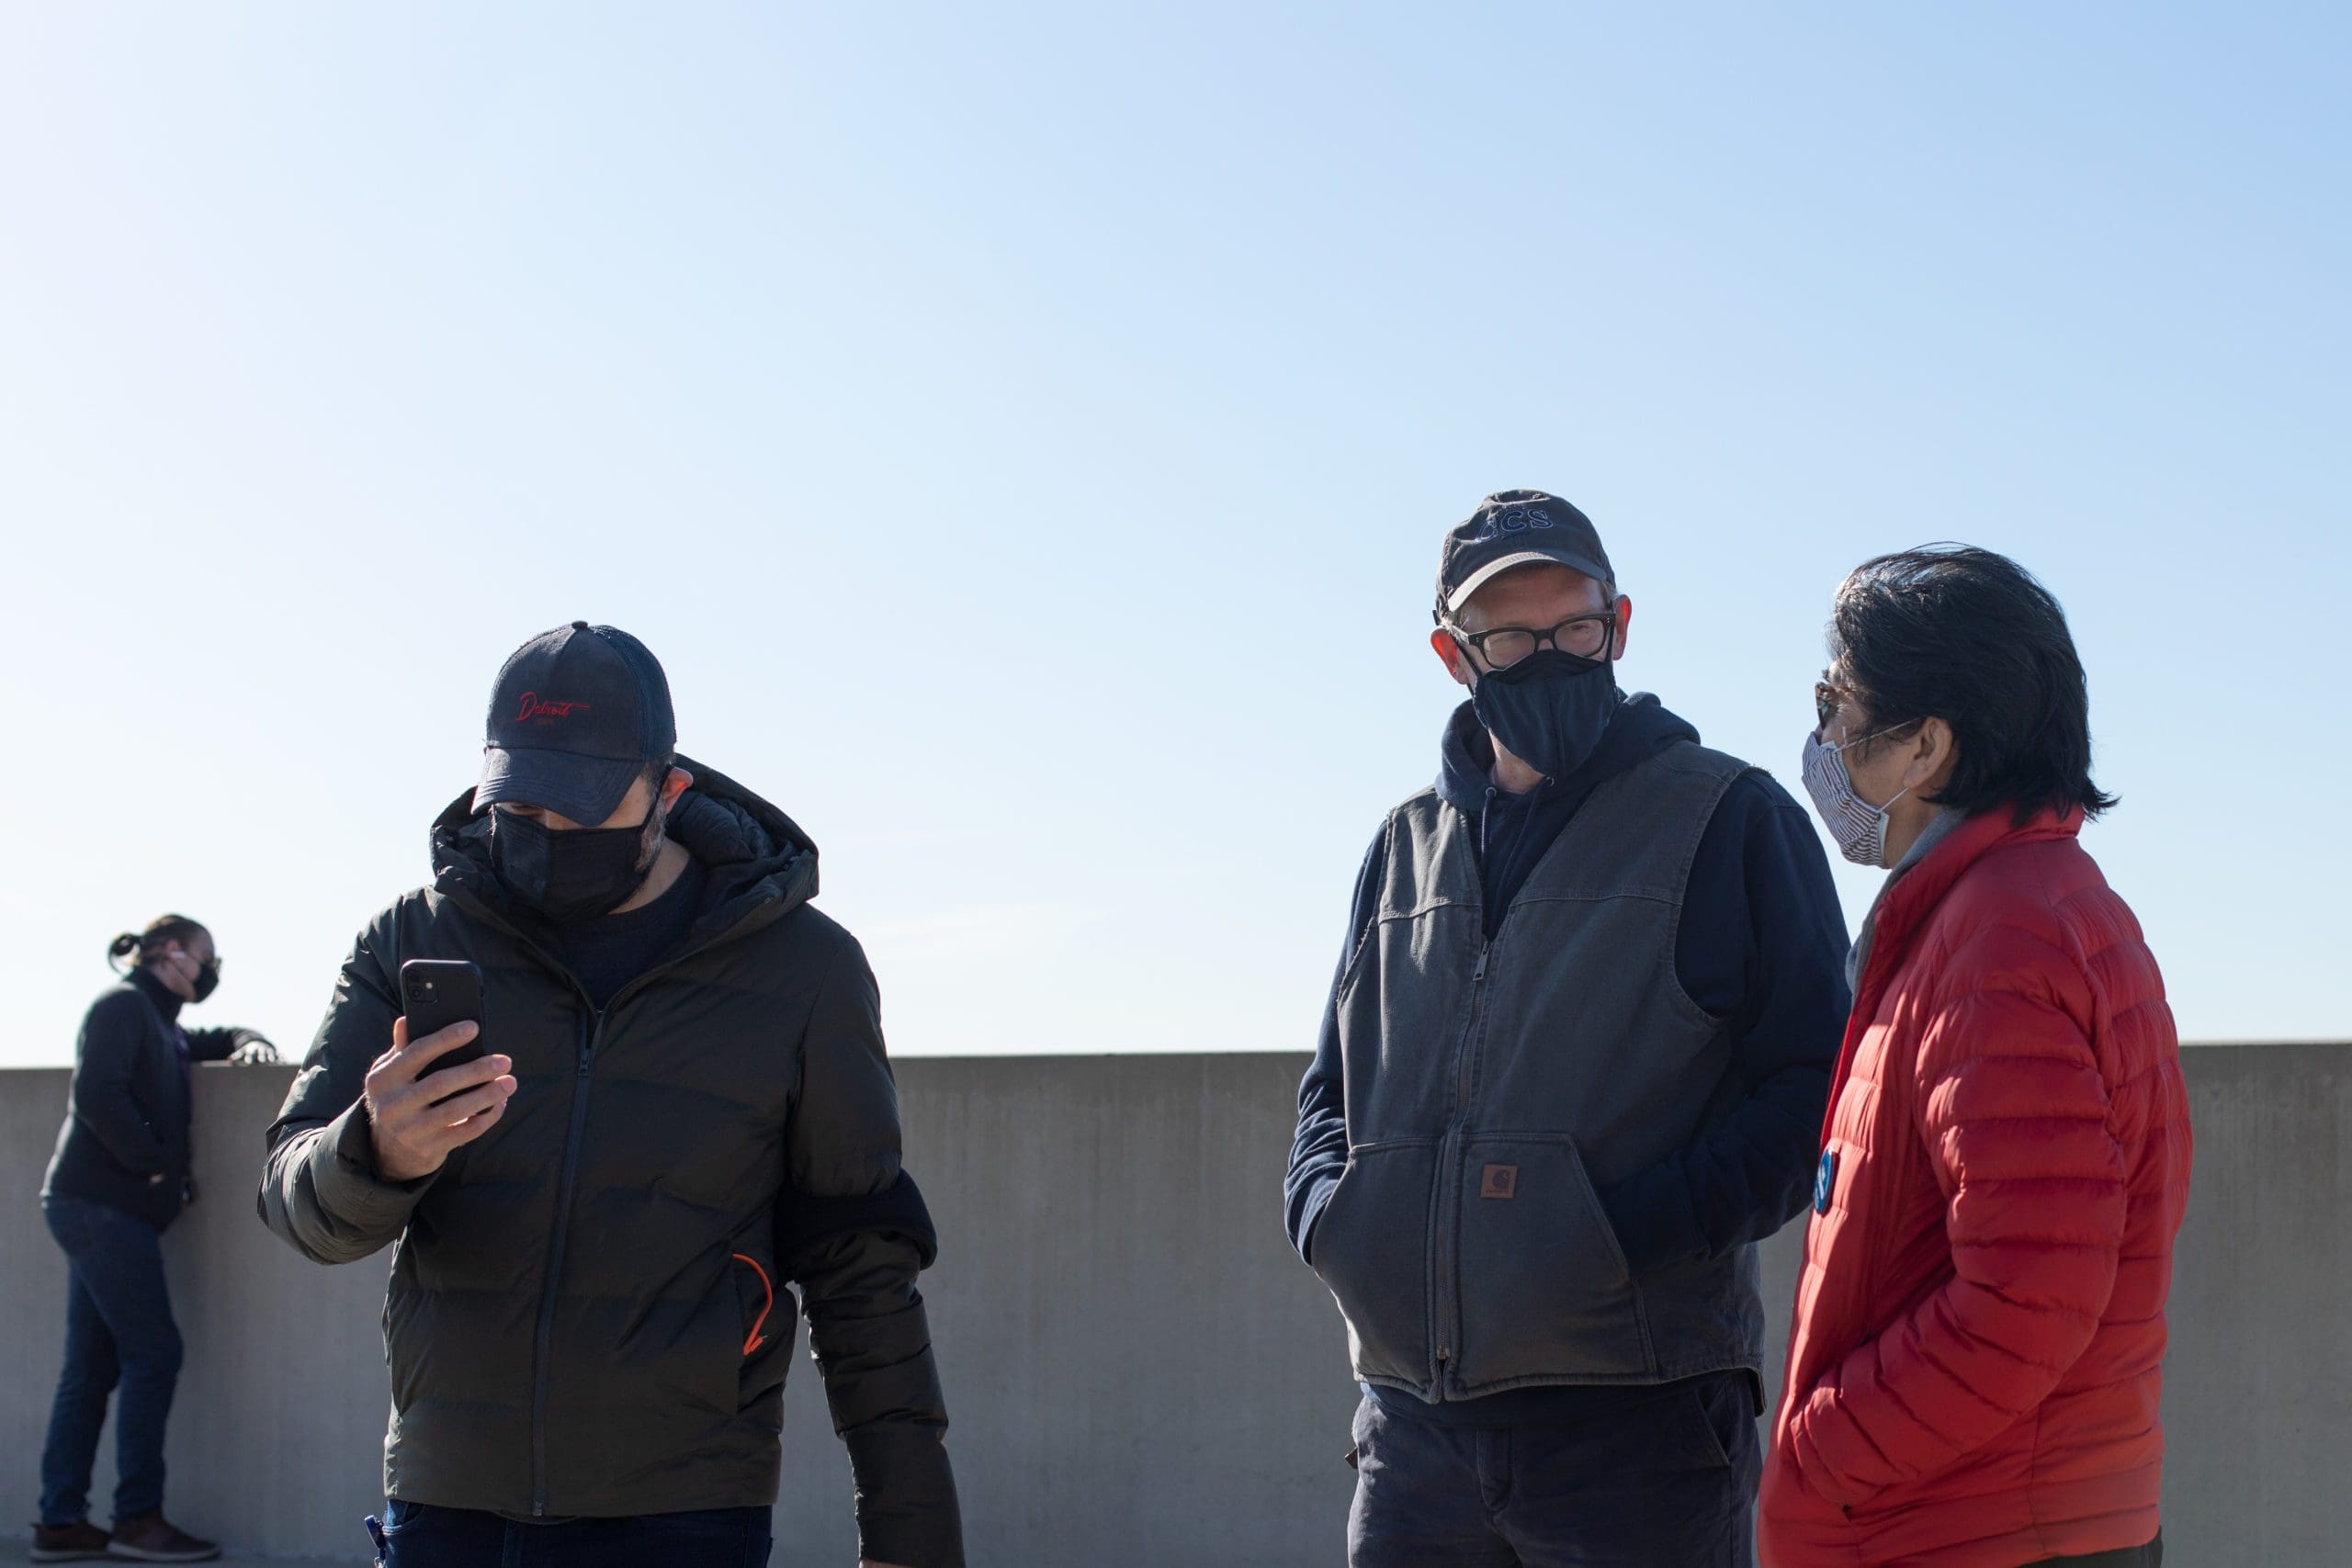 Don tuski standing with colleagues on a rooftop, all wearing masks